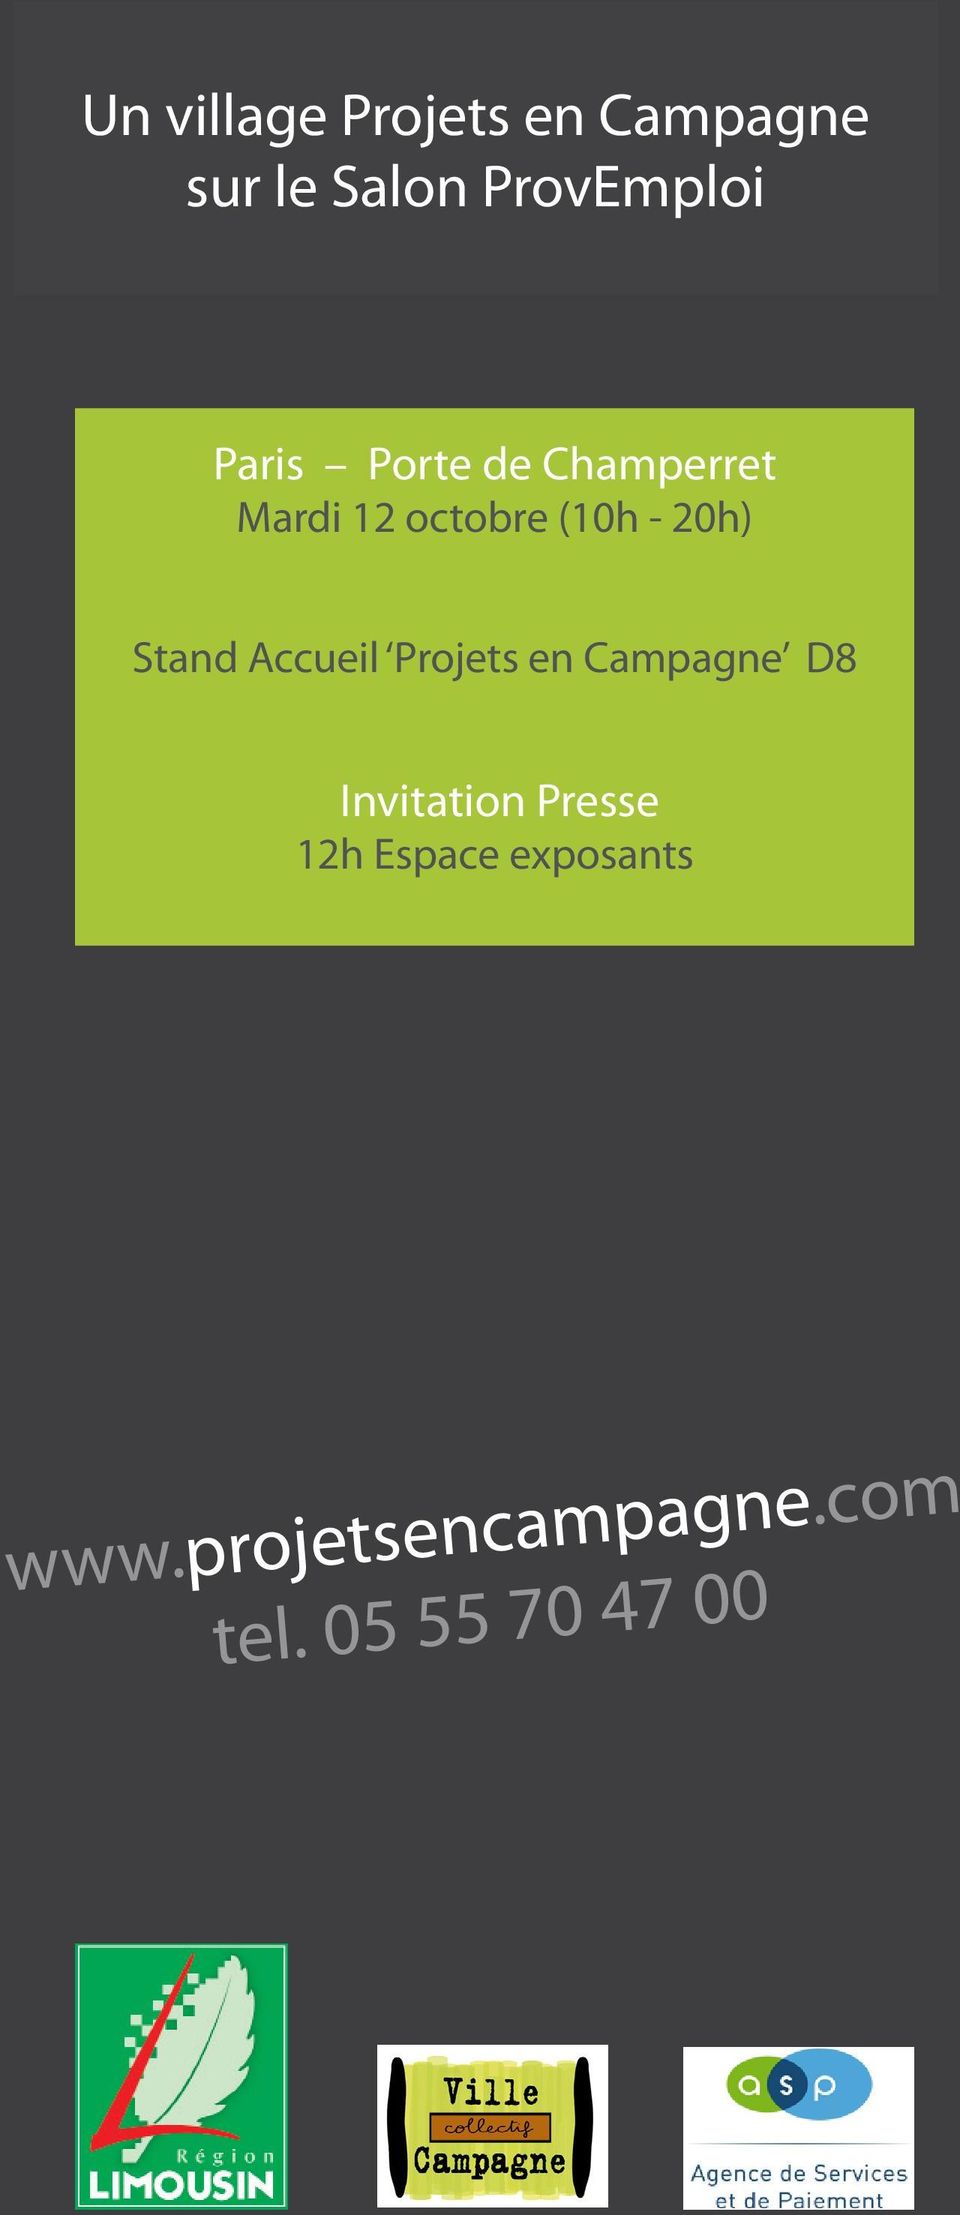 Stand Accueil Projets en Campagne D8 Invitation Presse